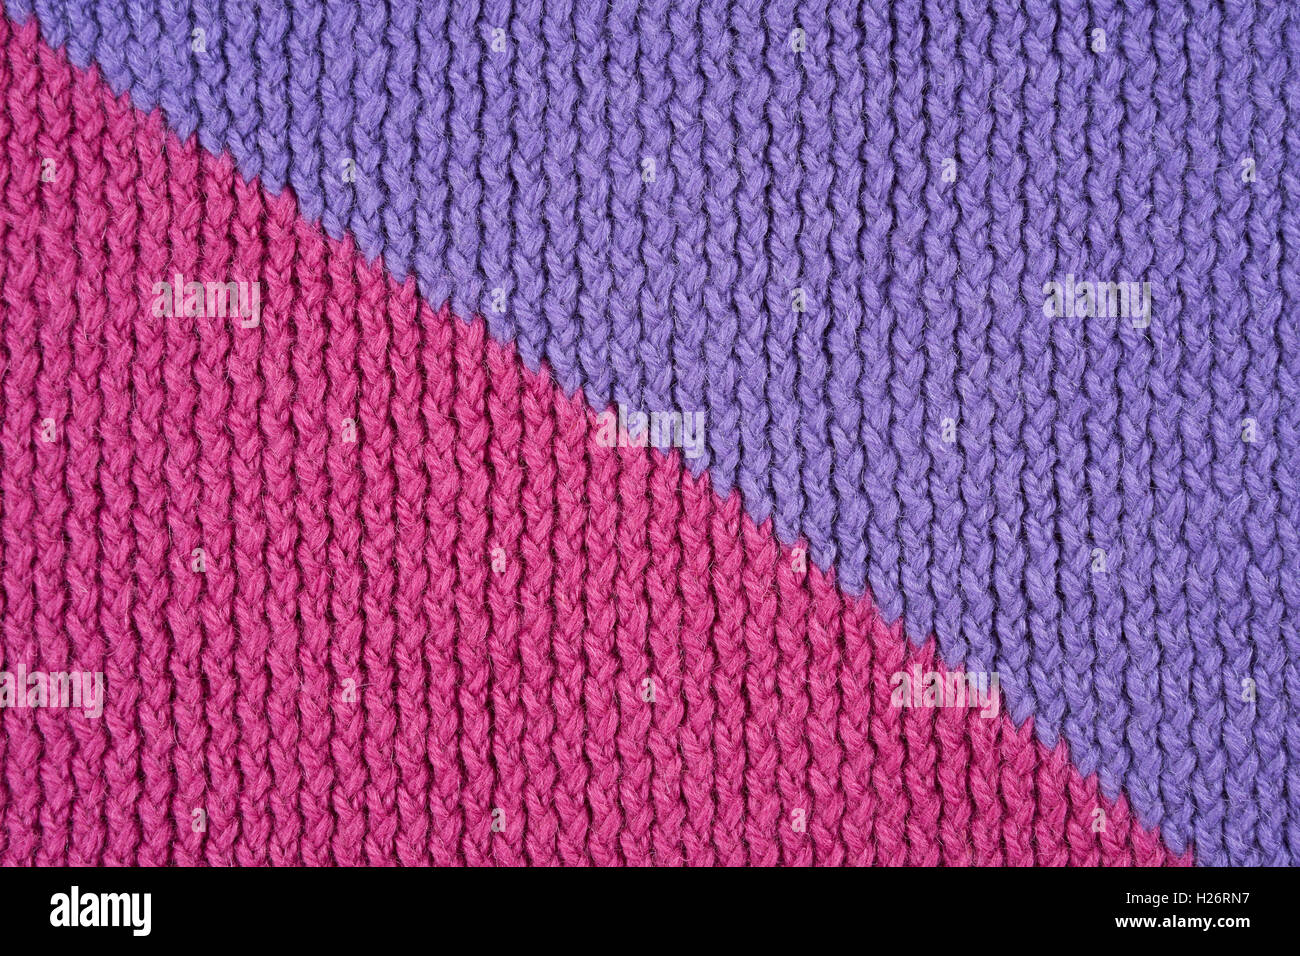 Pink and violet knitting as a seamless background Stock Photo